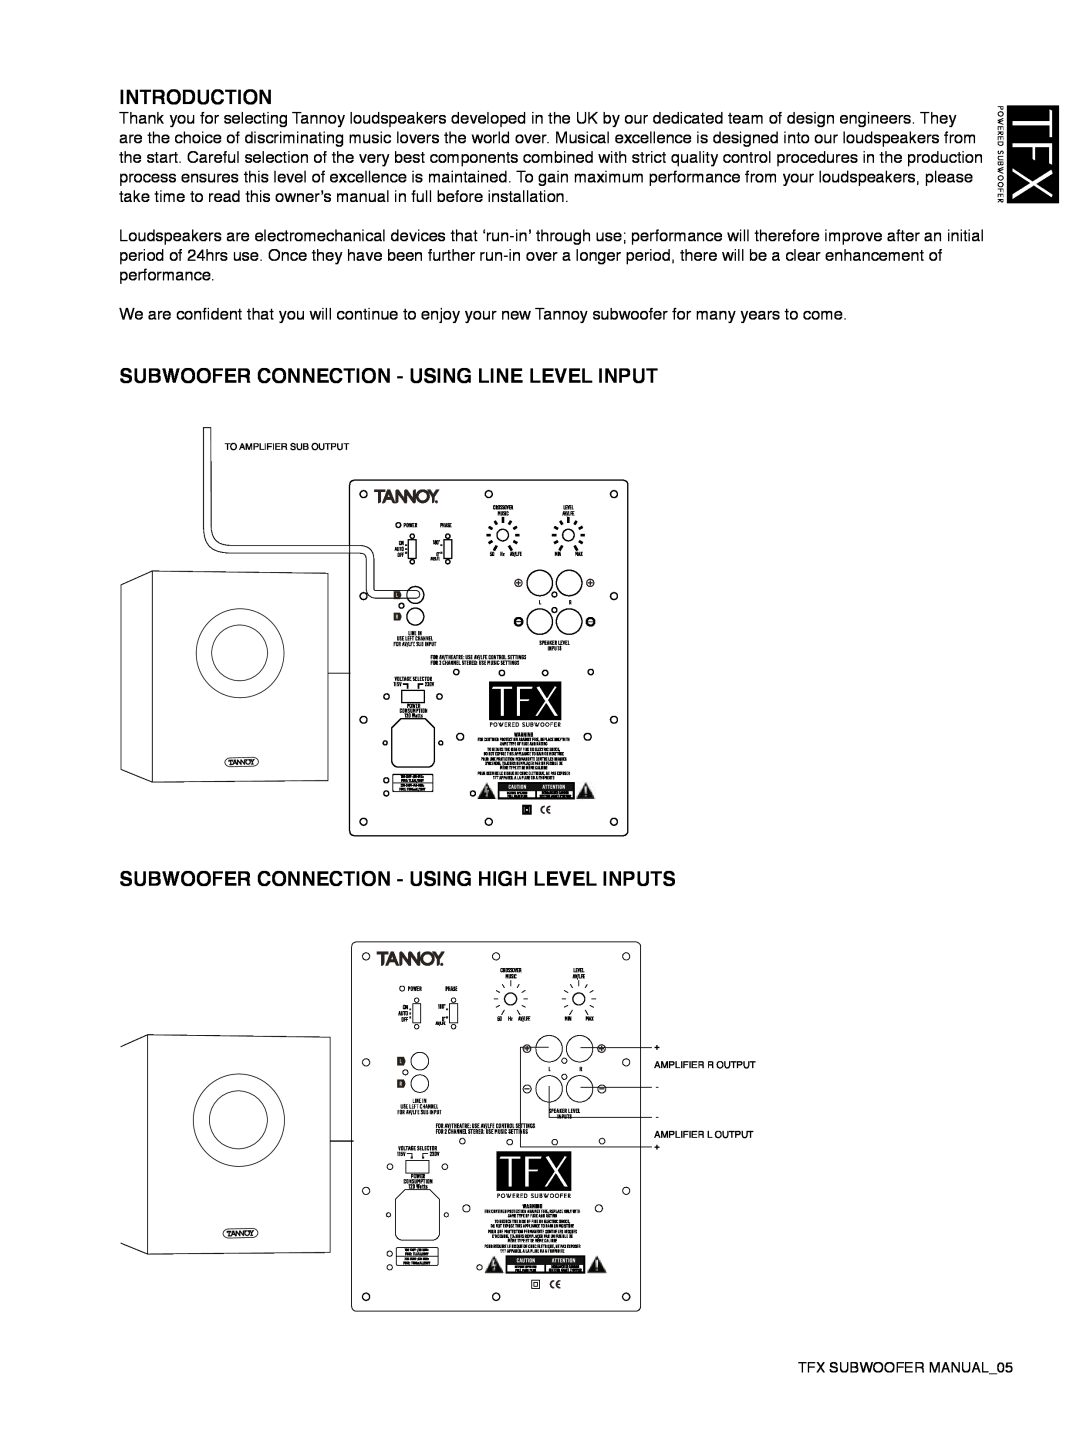 Tannoy TFX Powerd Subwoofer Introduction, Subwoofer Connection - Using Line Level Input, TFX SUBWOOFER MANUAL05 